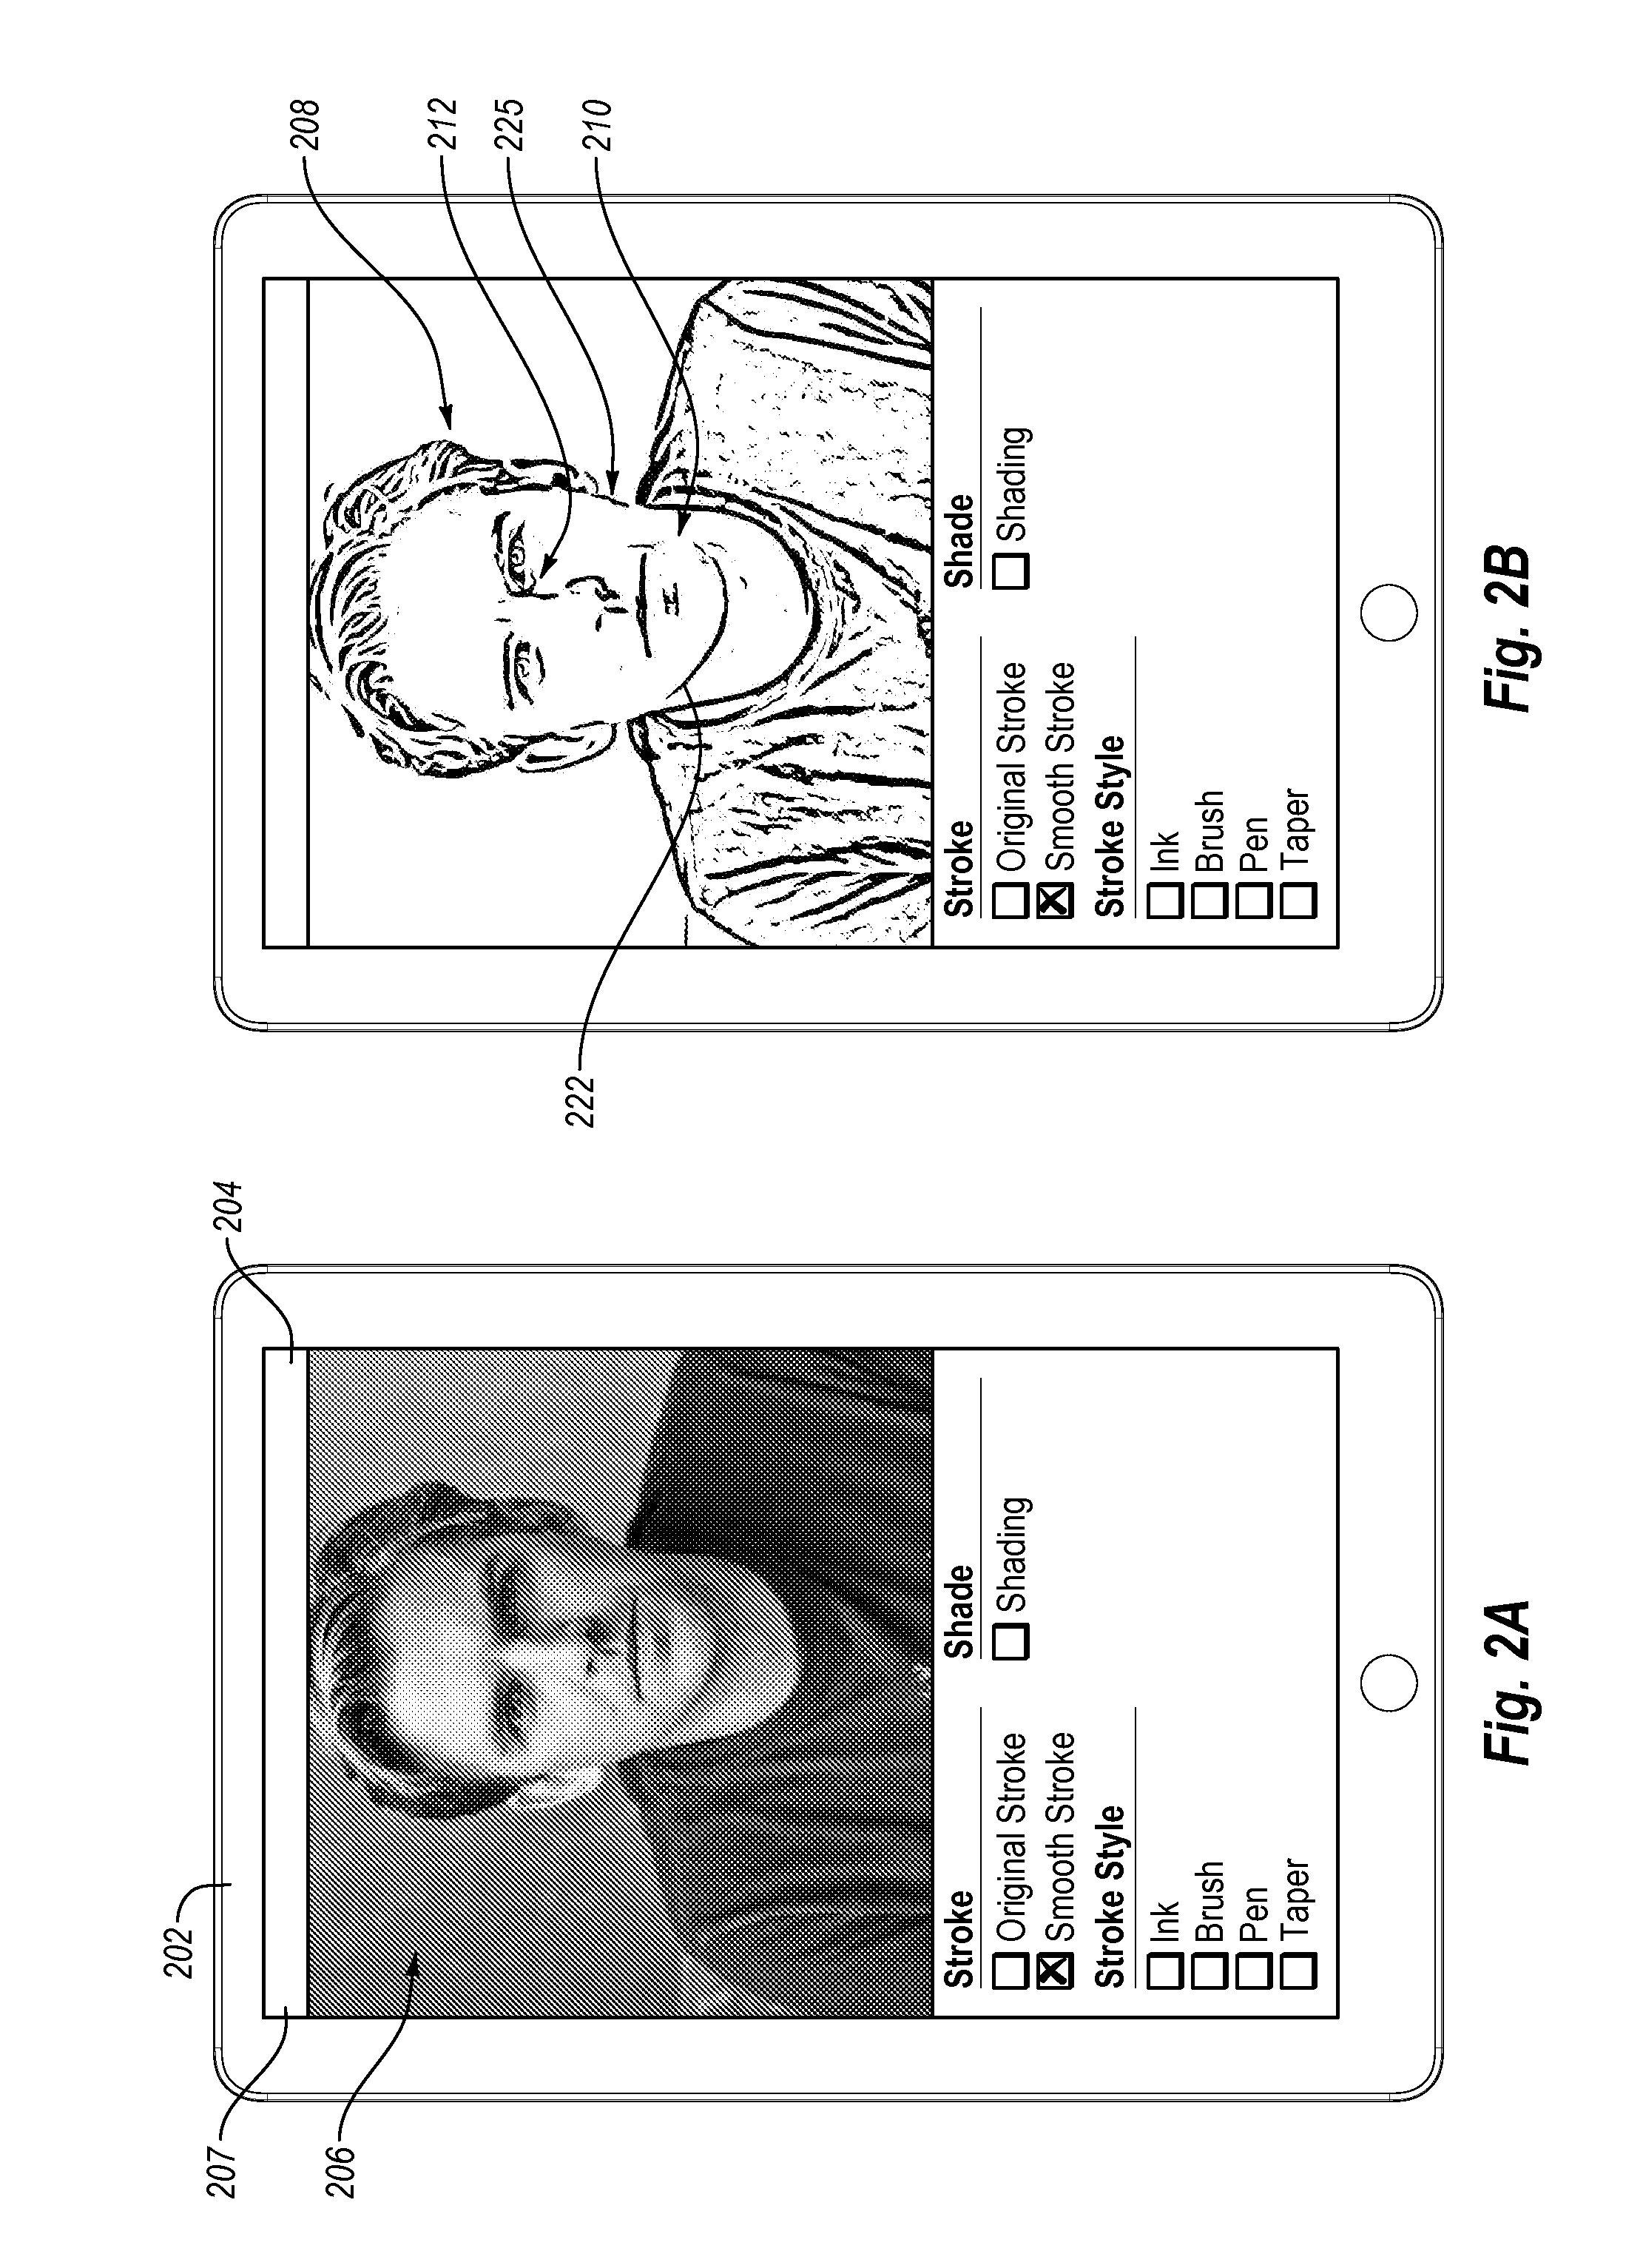 Providing drawing assistance using feature detection and semantic labeling